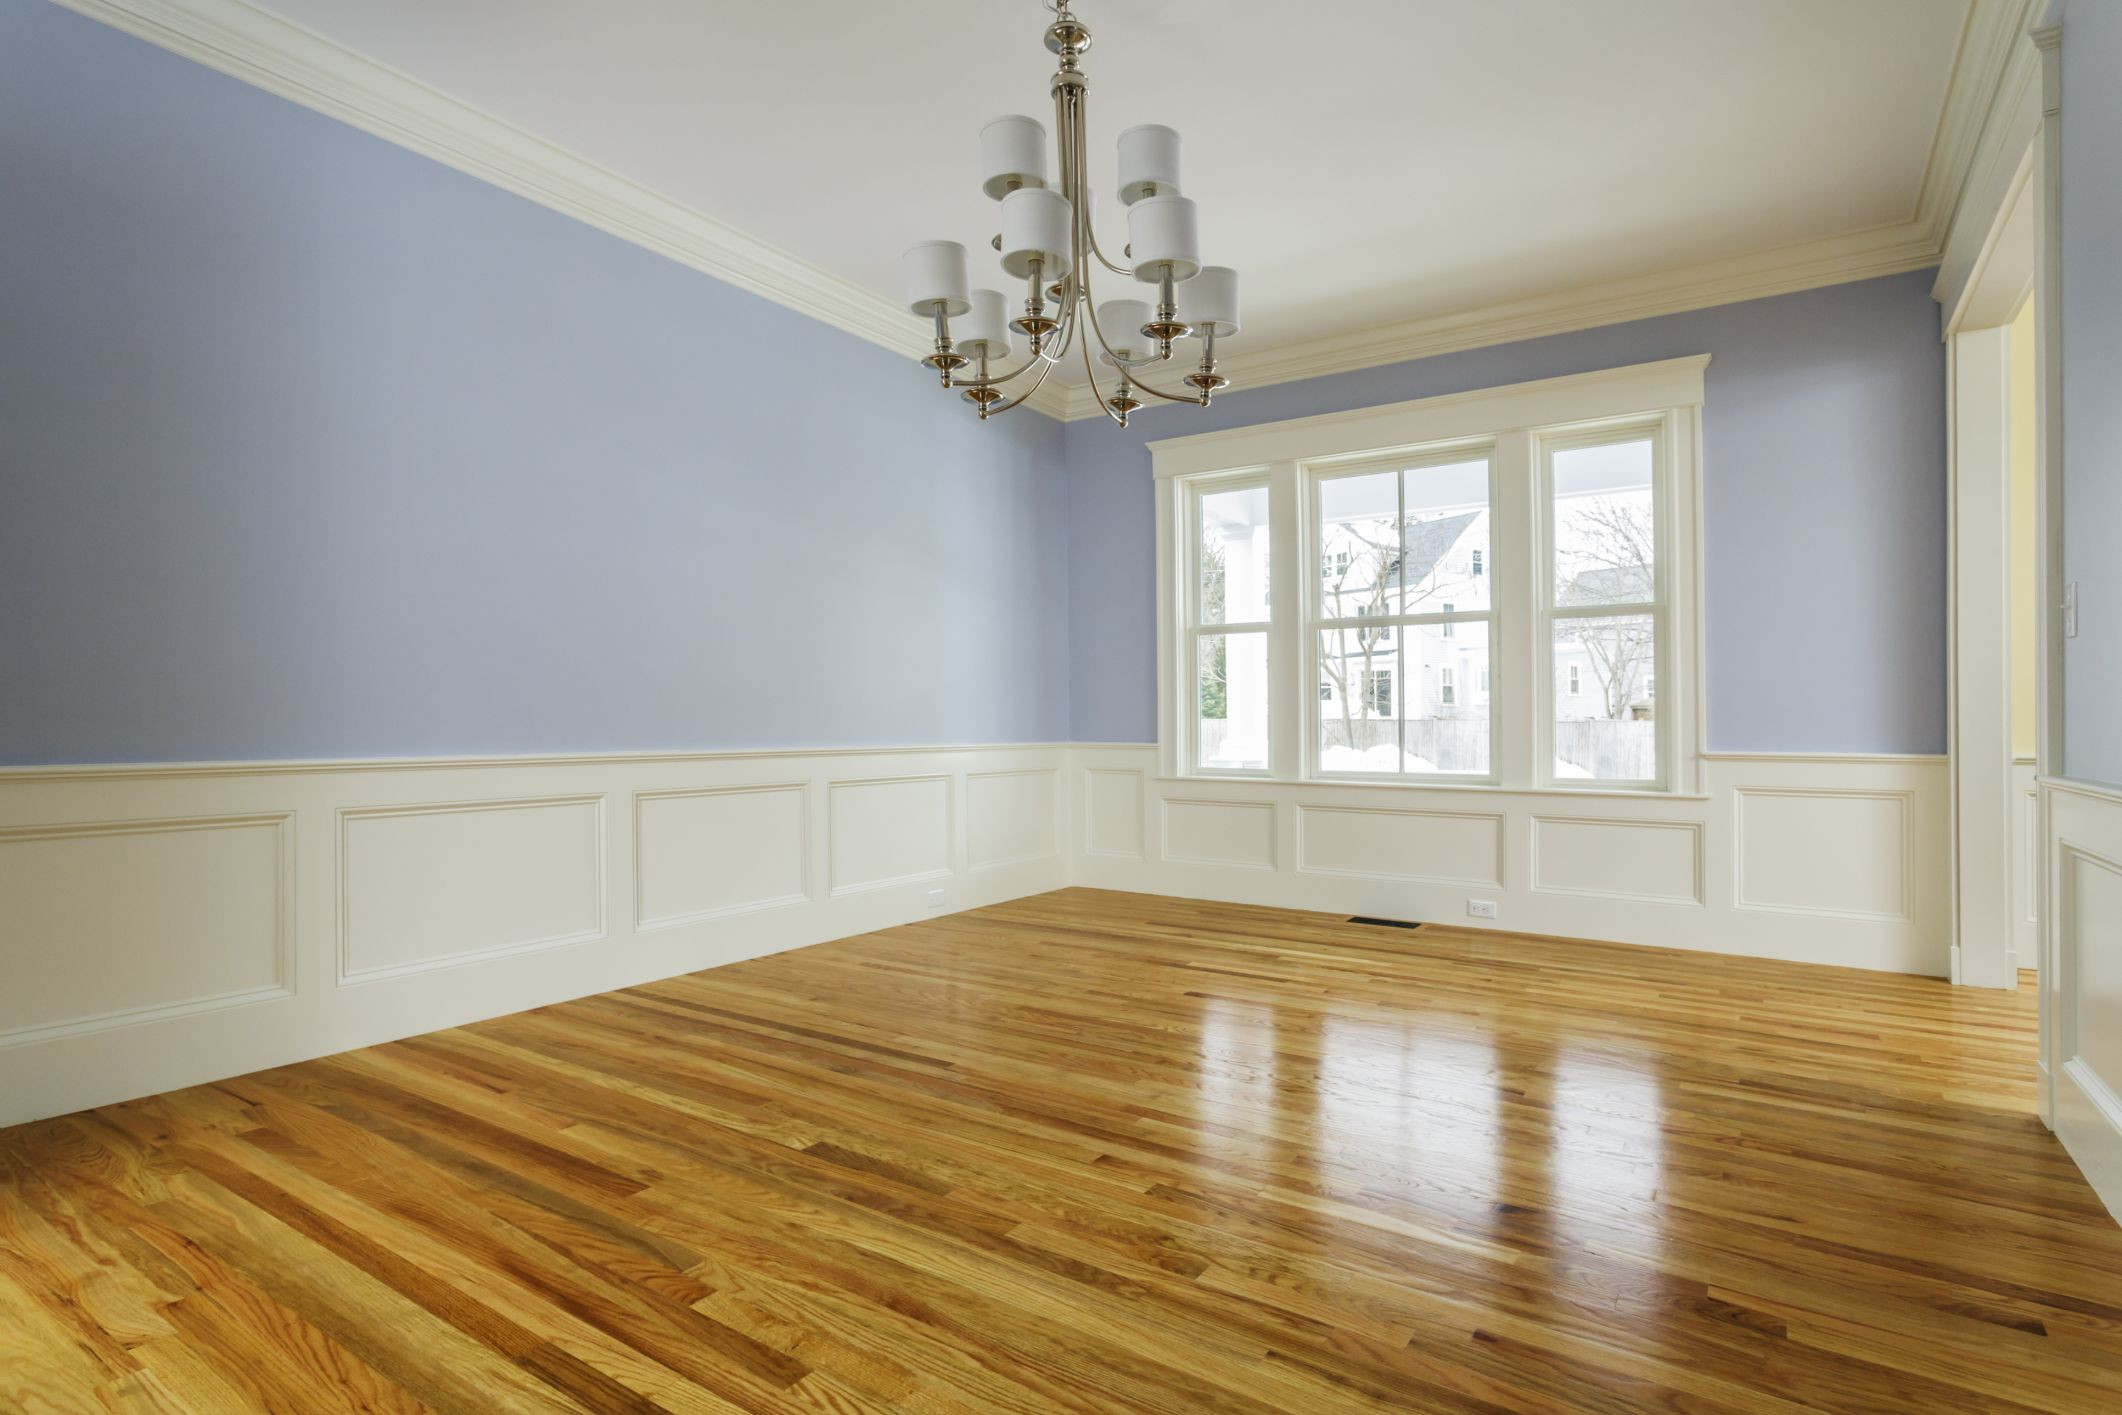 hardwood floors discount prices of the cost to refinish hardwood floors throughout 168686572 highres 56a2fd773df78cf7727b6cb3